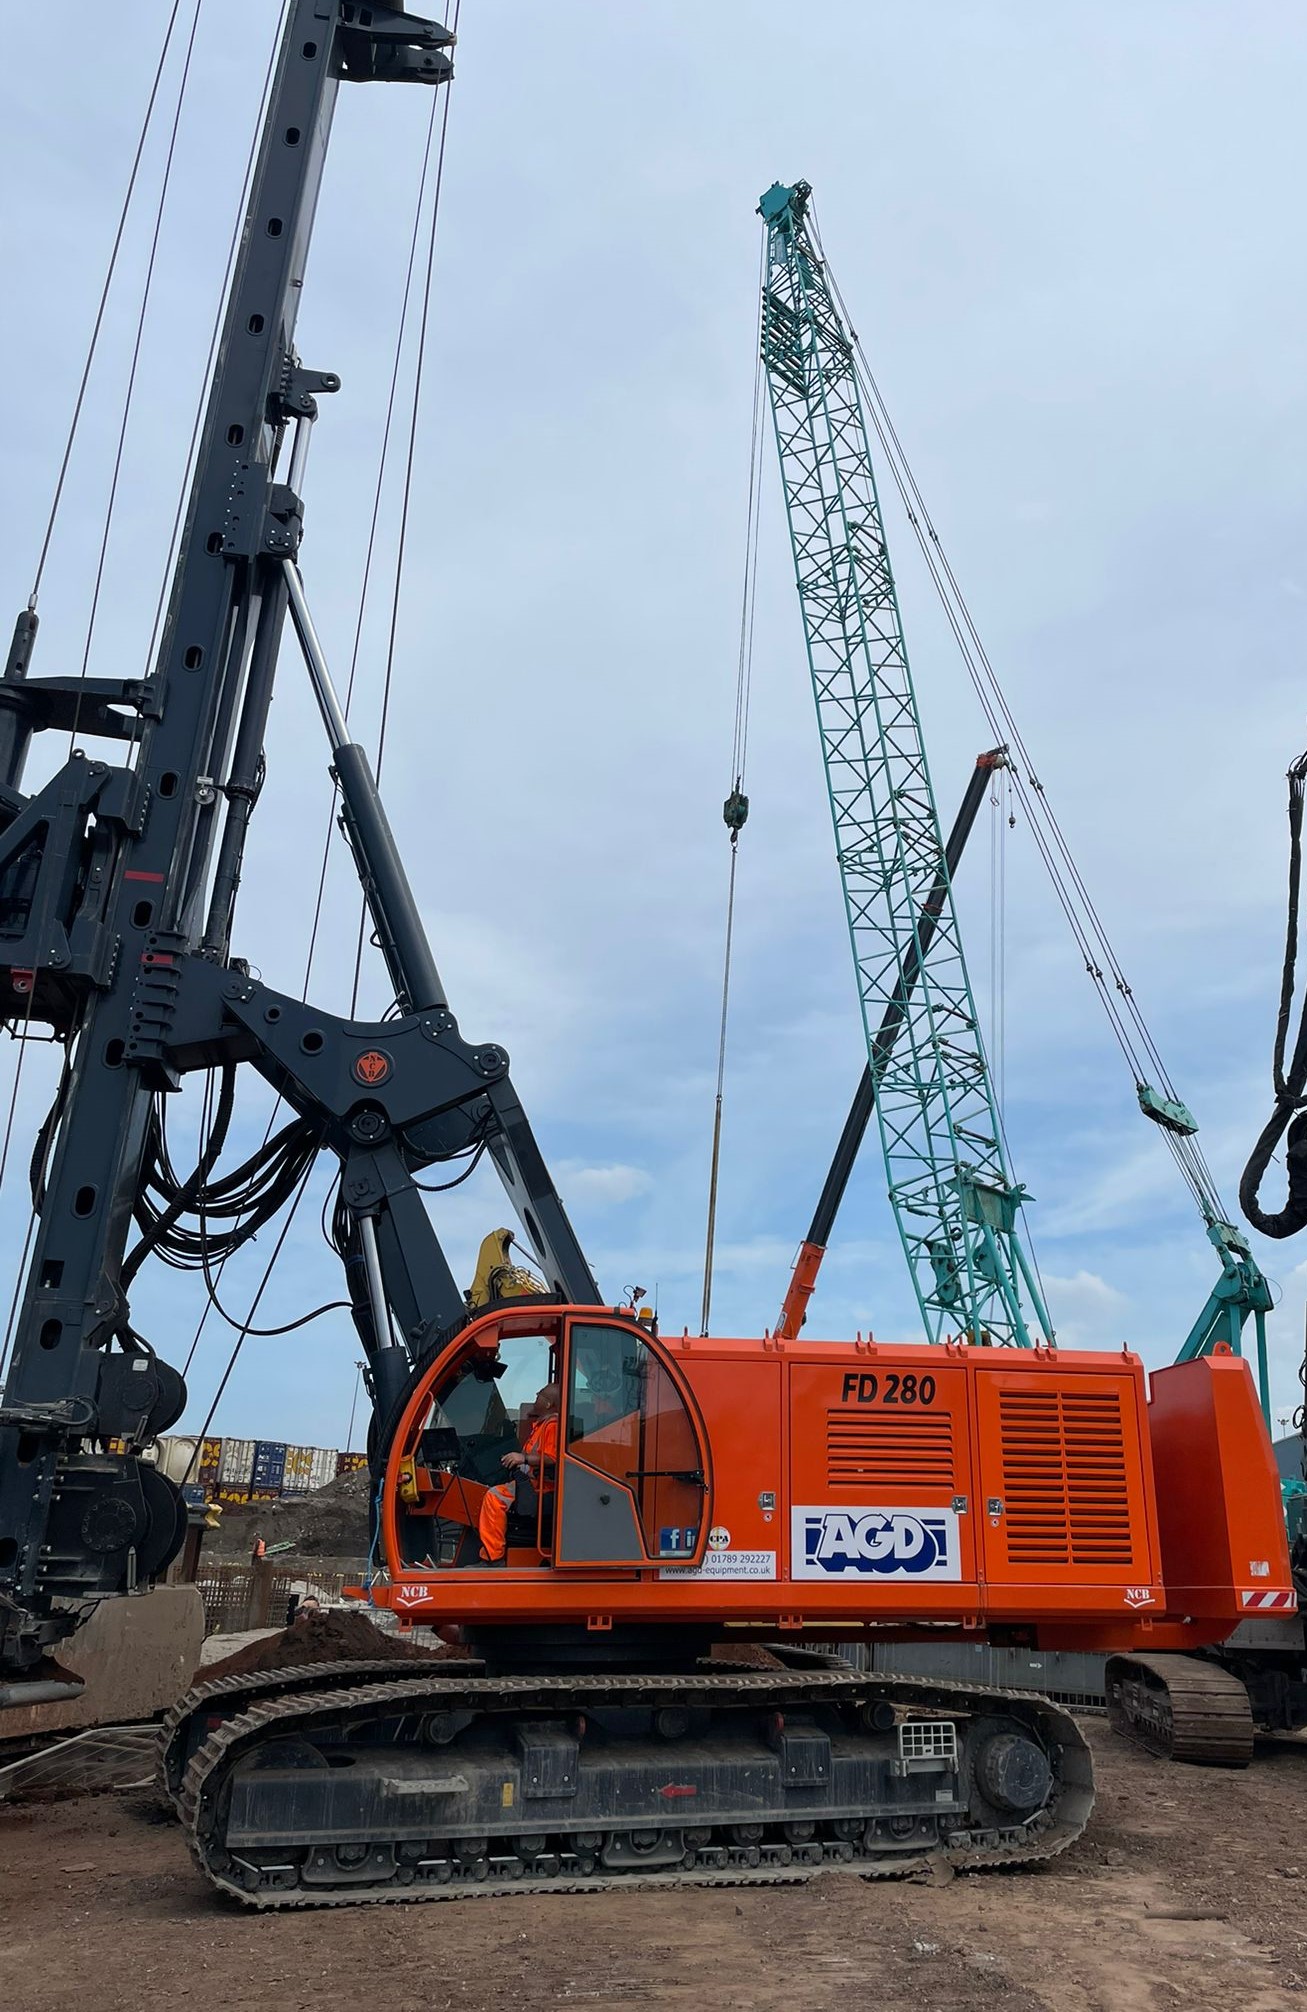 UK Suppliers of Rotary Bored Piling Rig Hire